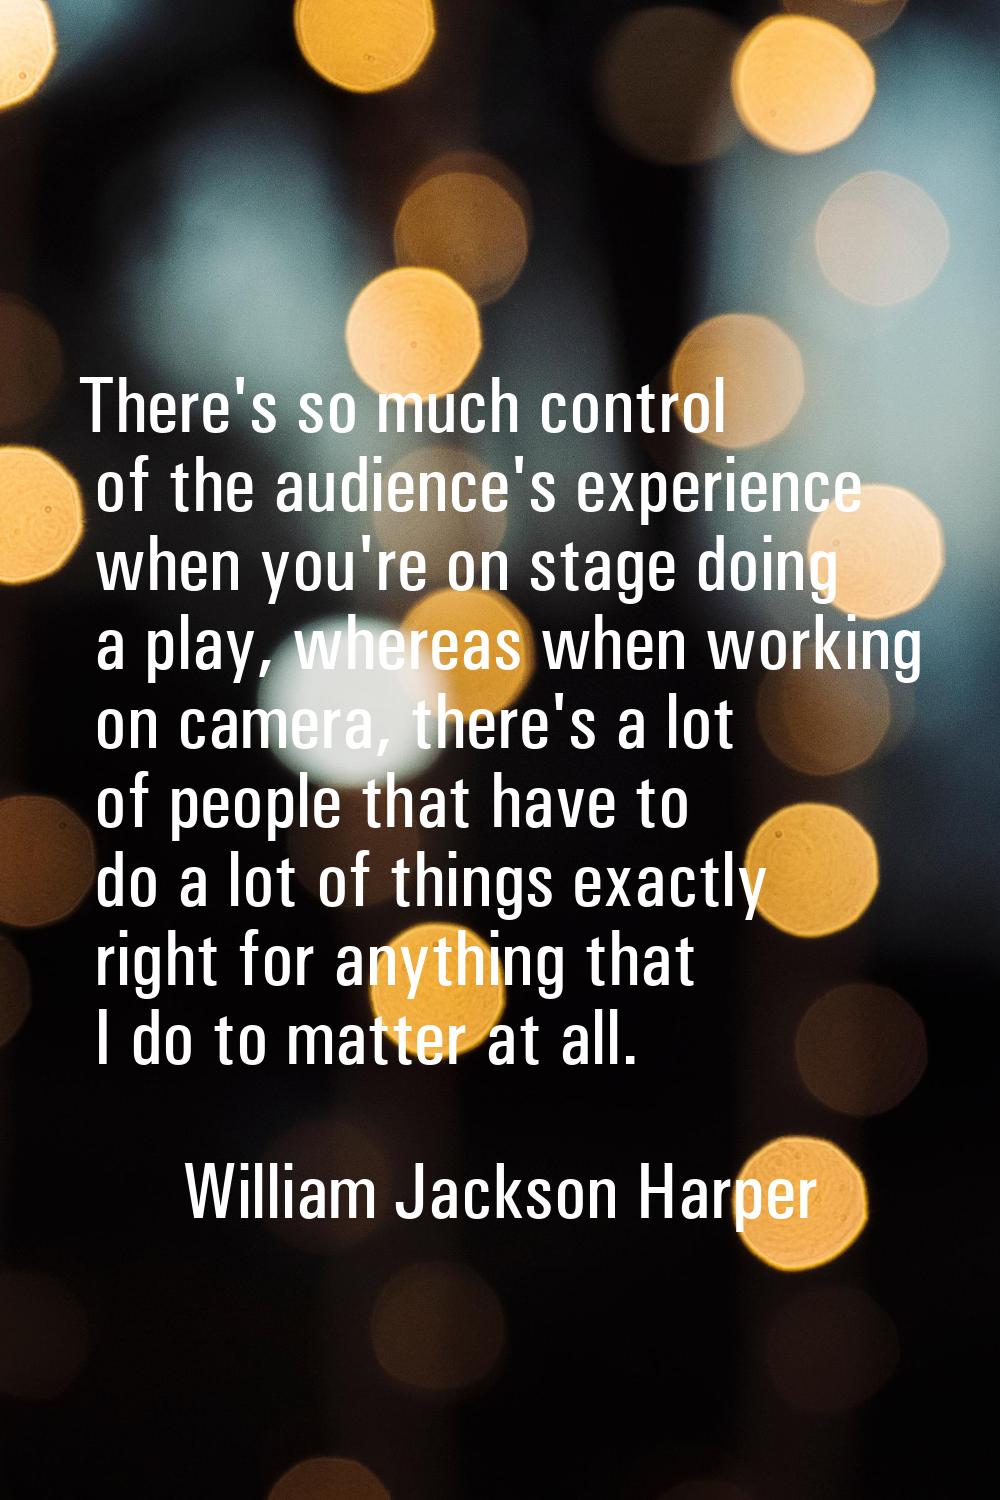 There's so much control of the audience's experience when you're on stage doing a play, whereas whe